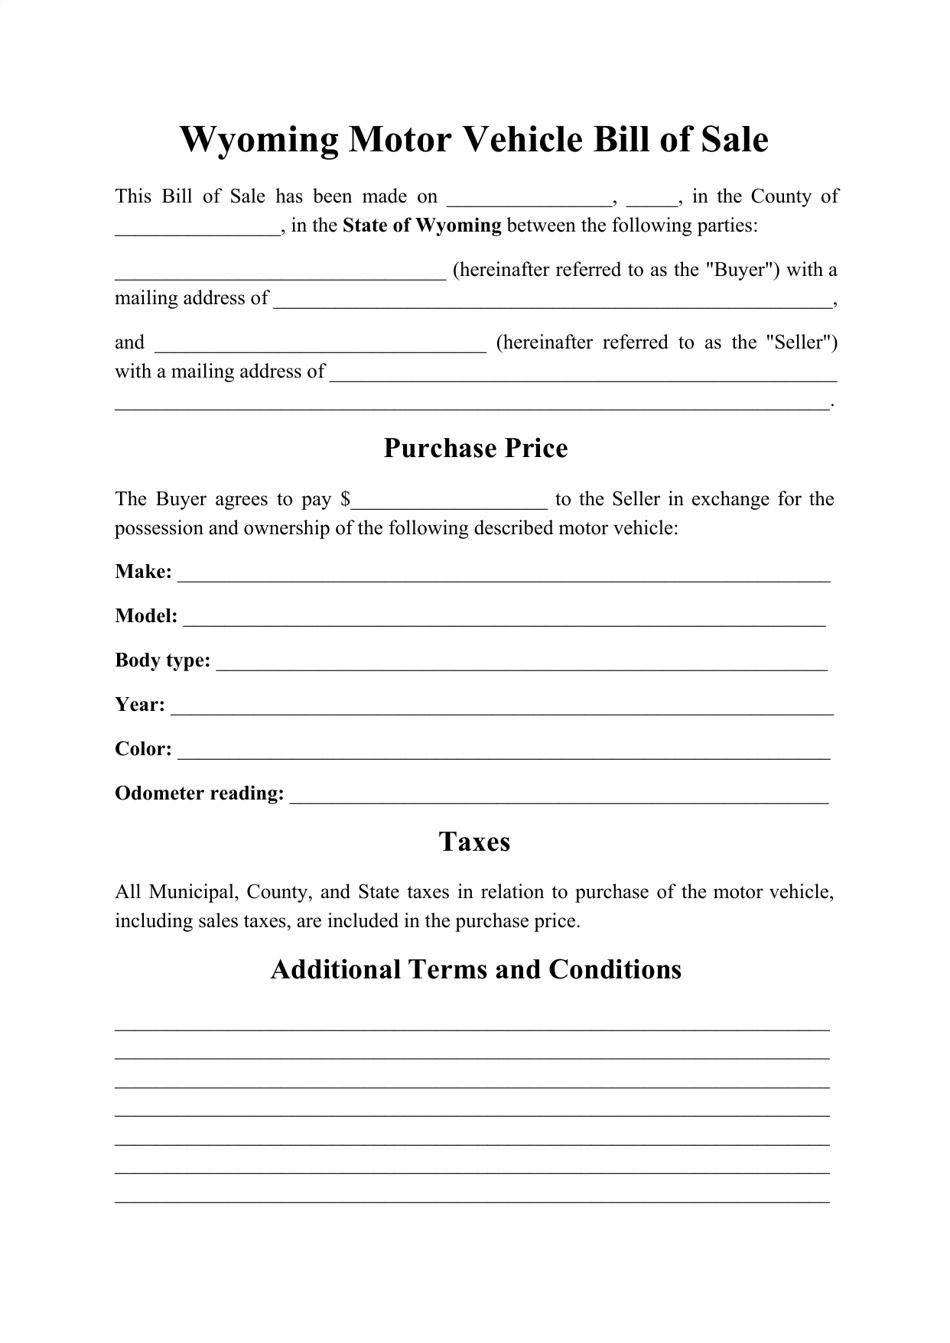 Wyoming Motor Vehicle Bill of Sale Form Fill Out, Sign Online and